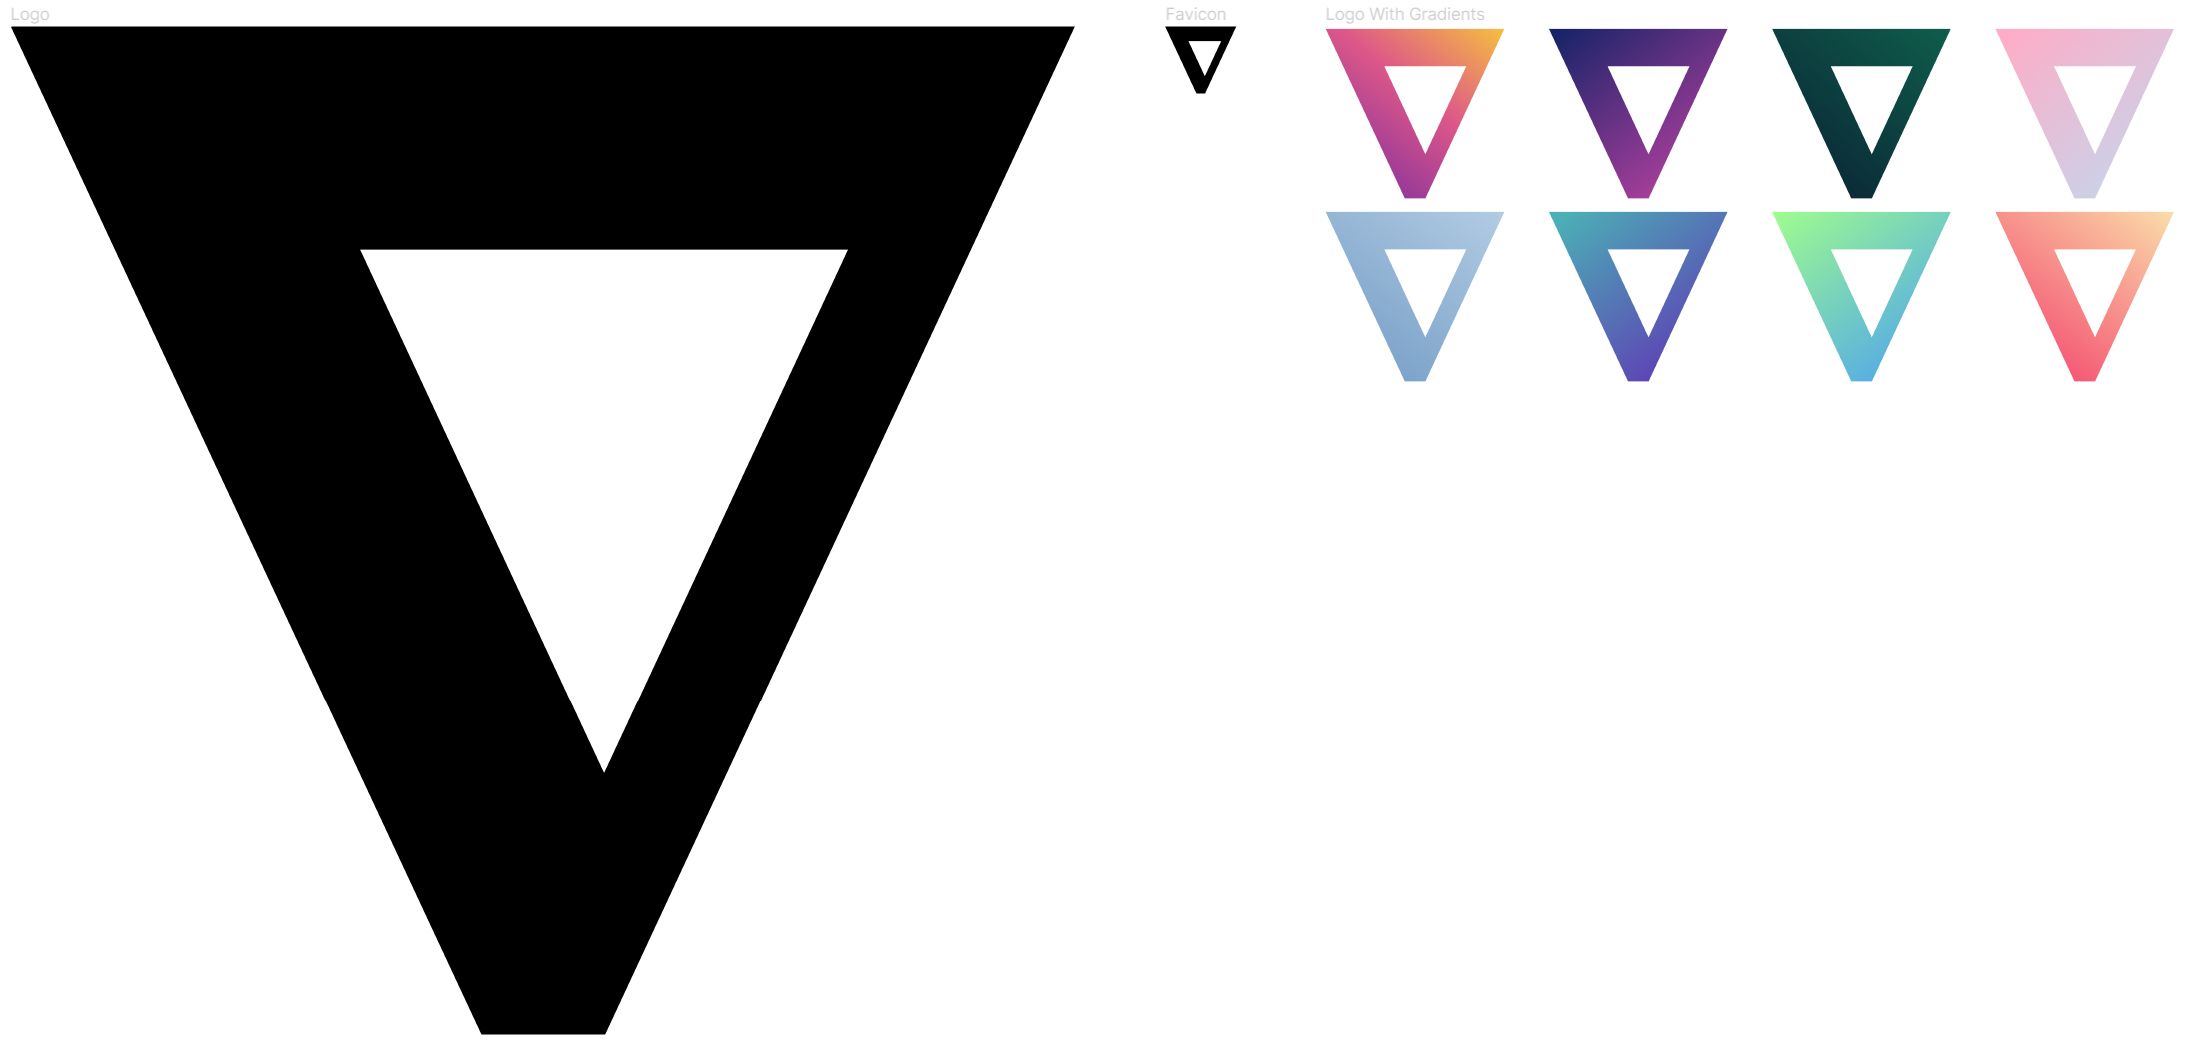 Layout of logos resembling a downwards facing triangle with gradient backgrounds.